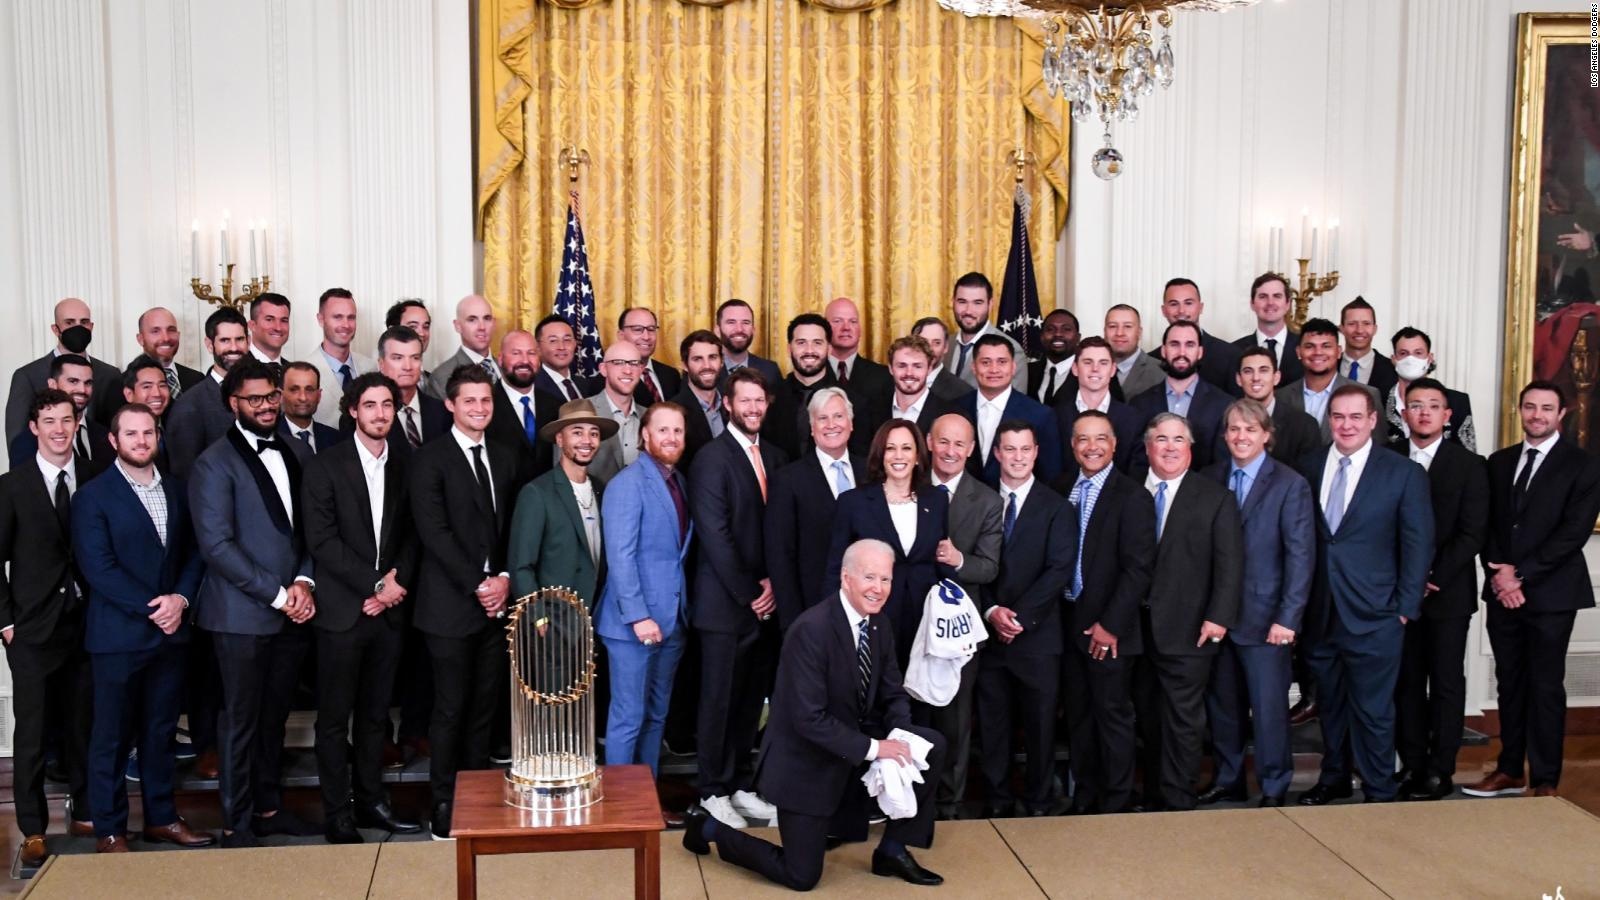 Recognition of the Dodgers in the White House | Video | CNN